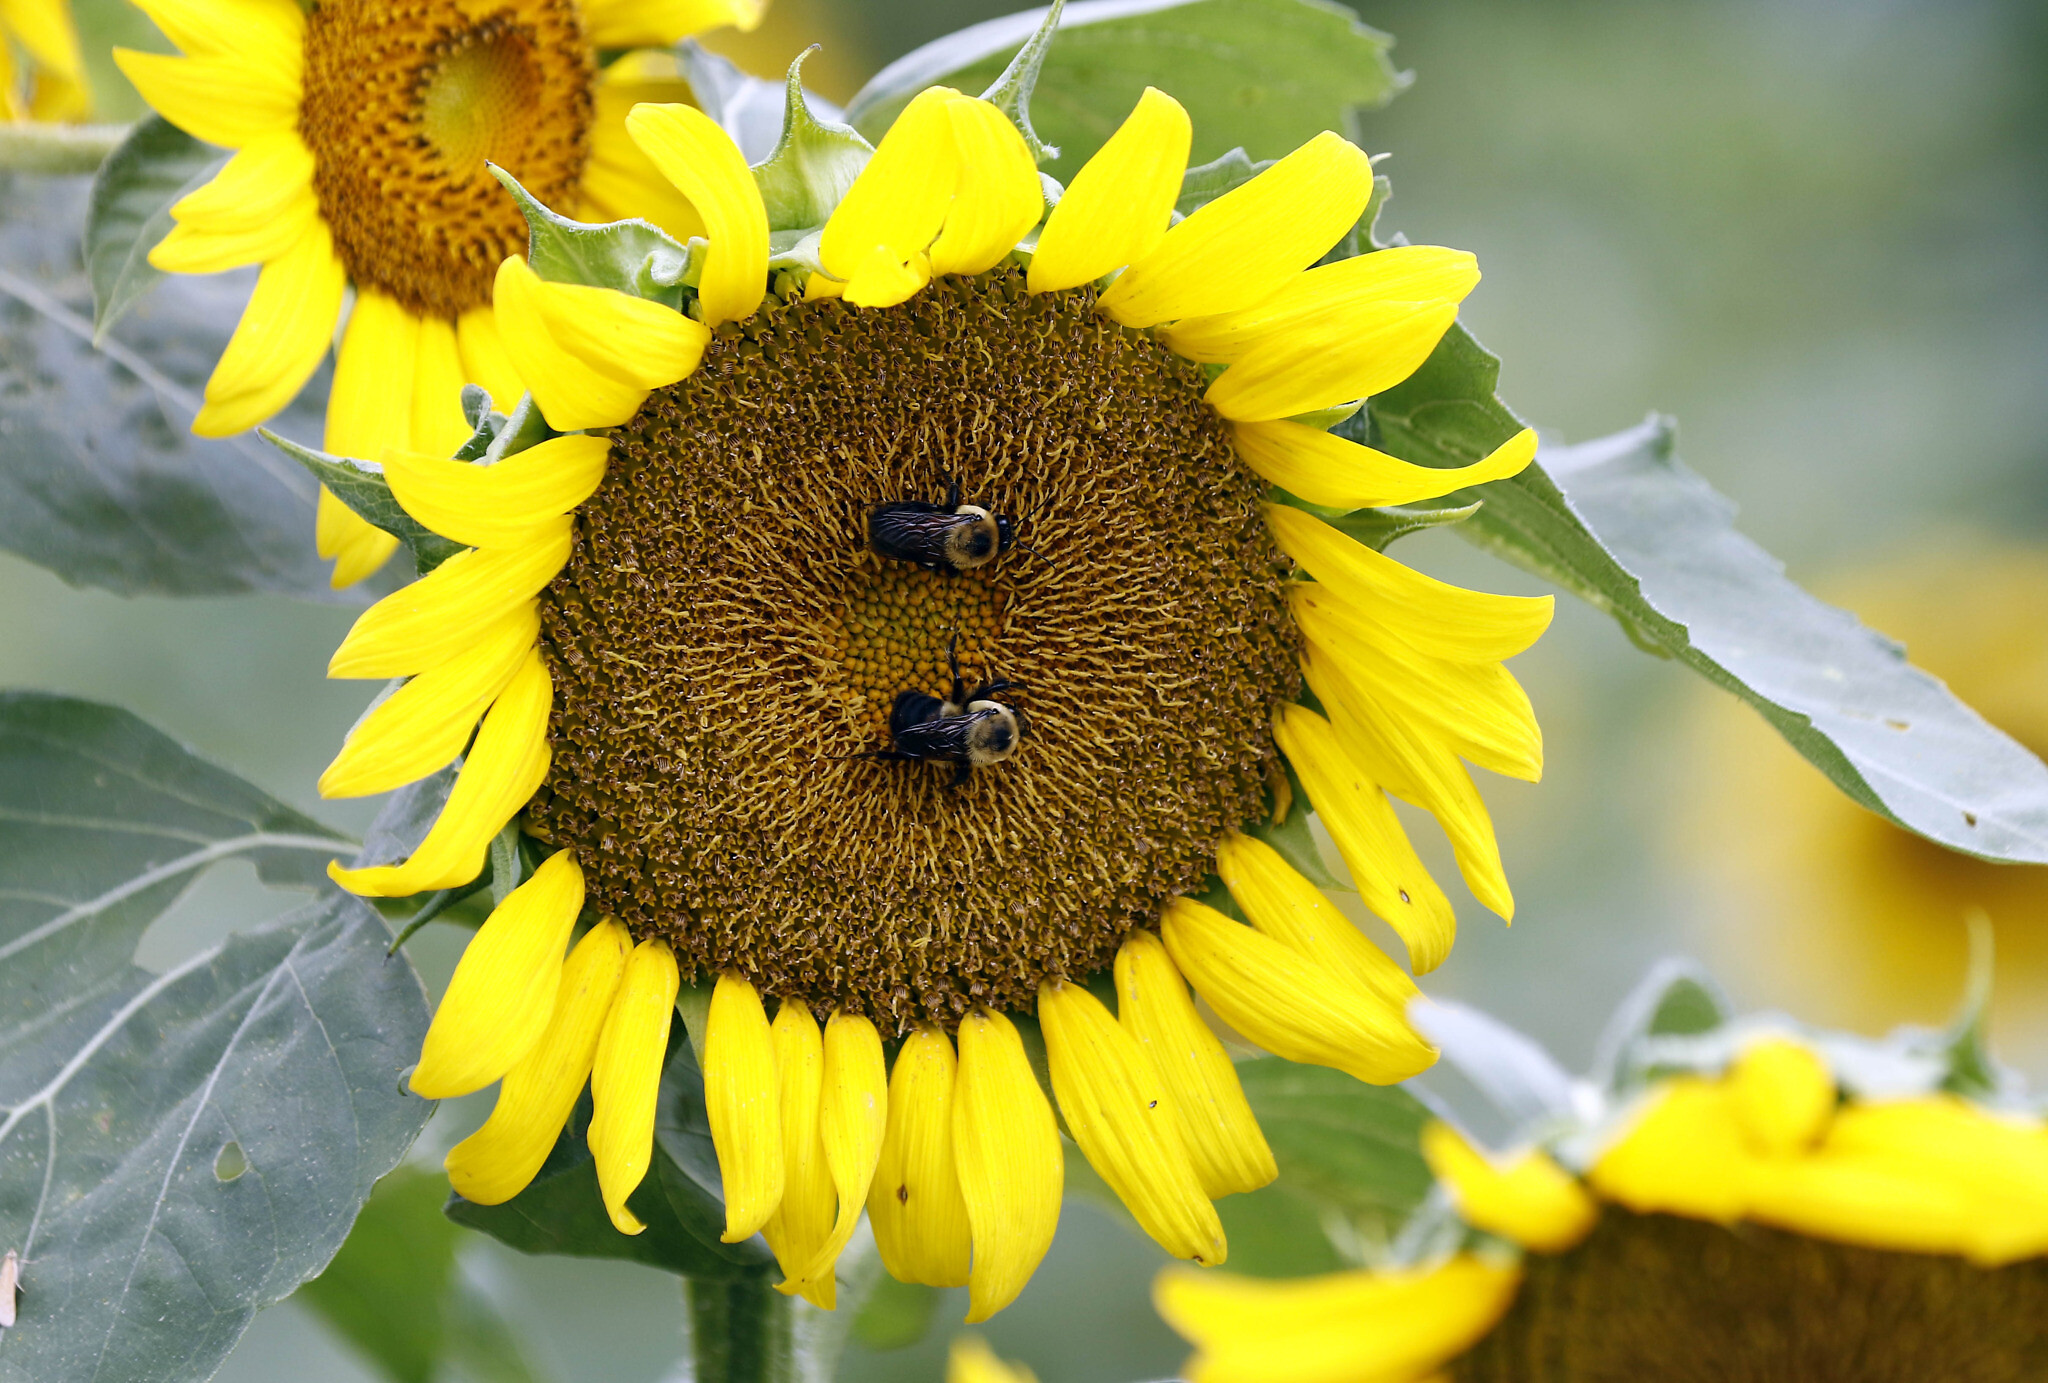 A couple of bumble bees inspect and pollinate a sunflower on a Gaddis Farms field in Bolton, Miss., Friday, July 13, 2018. (AP Photo/Rogelio V. Solis)